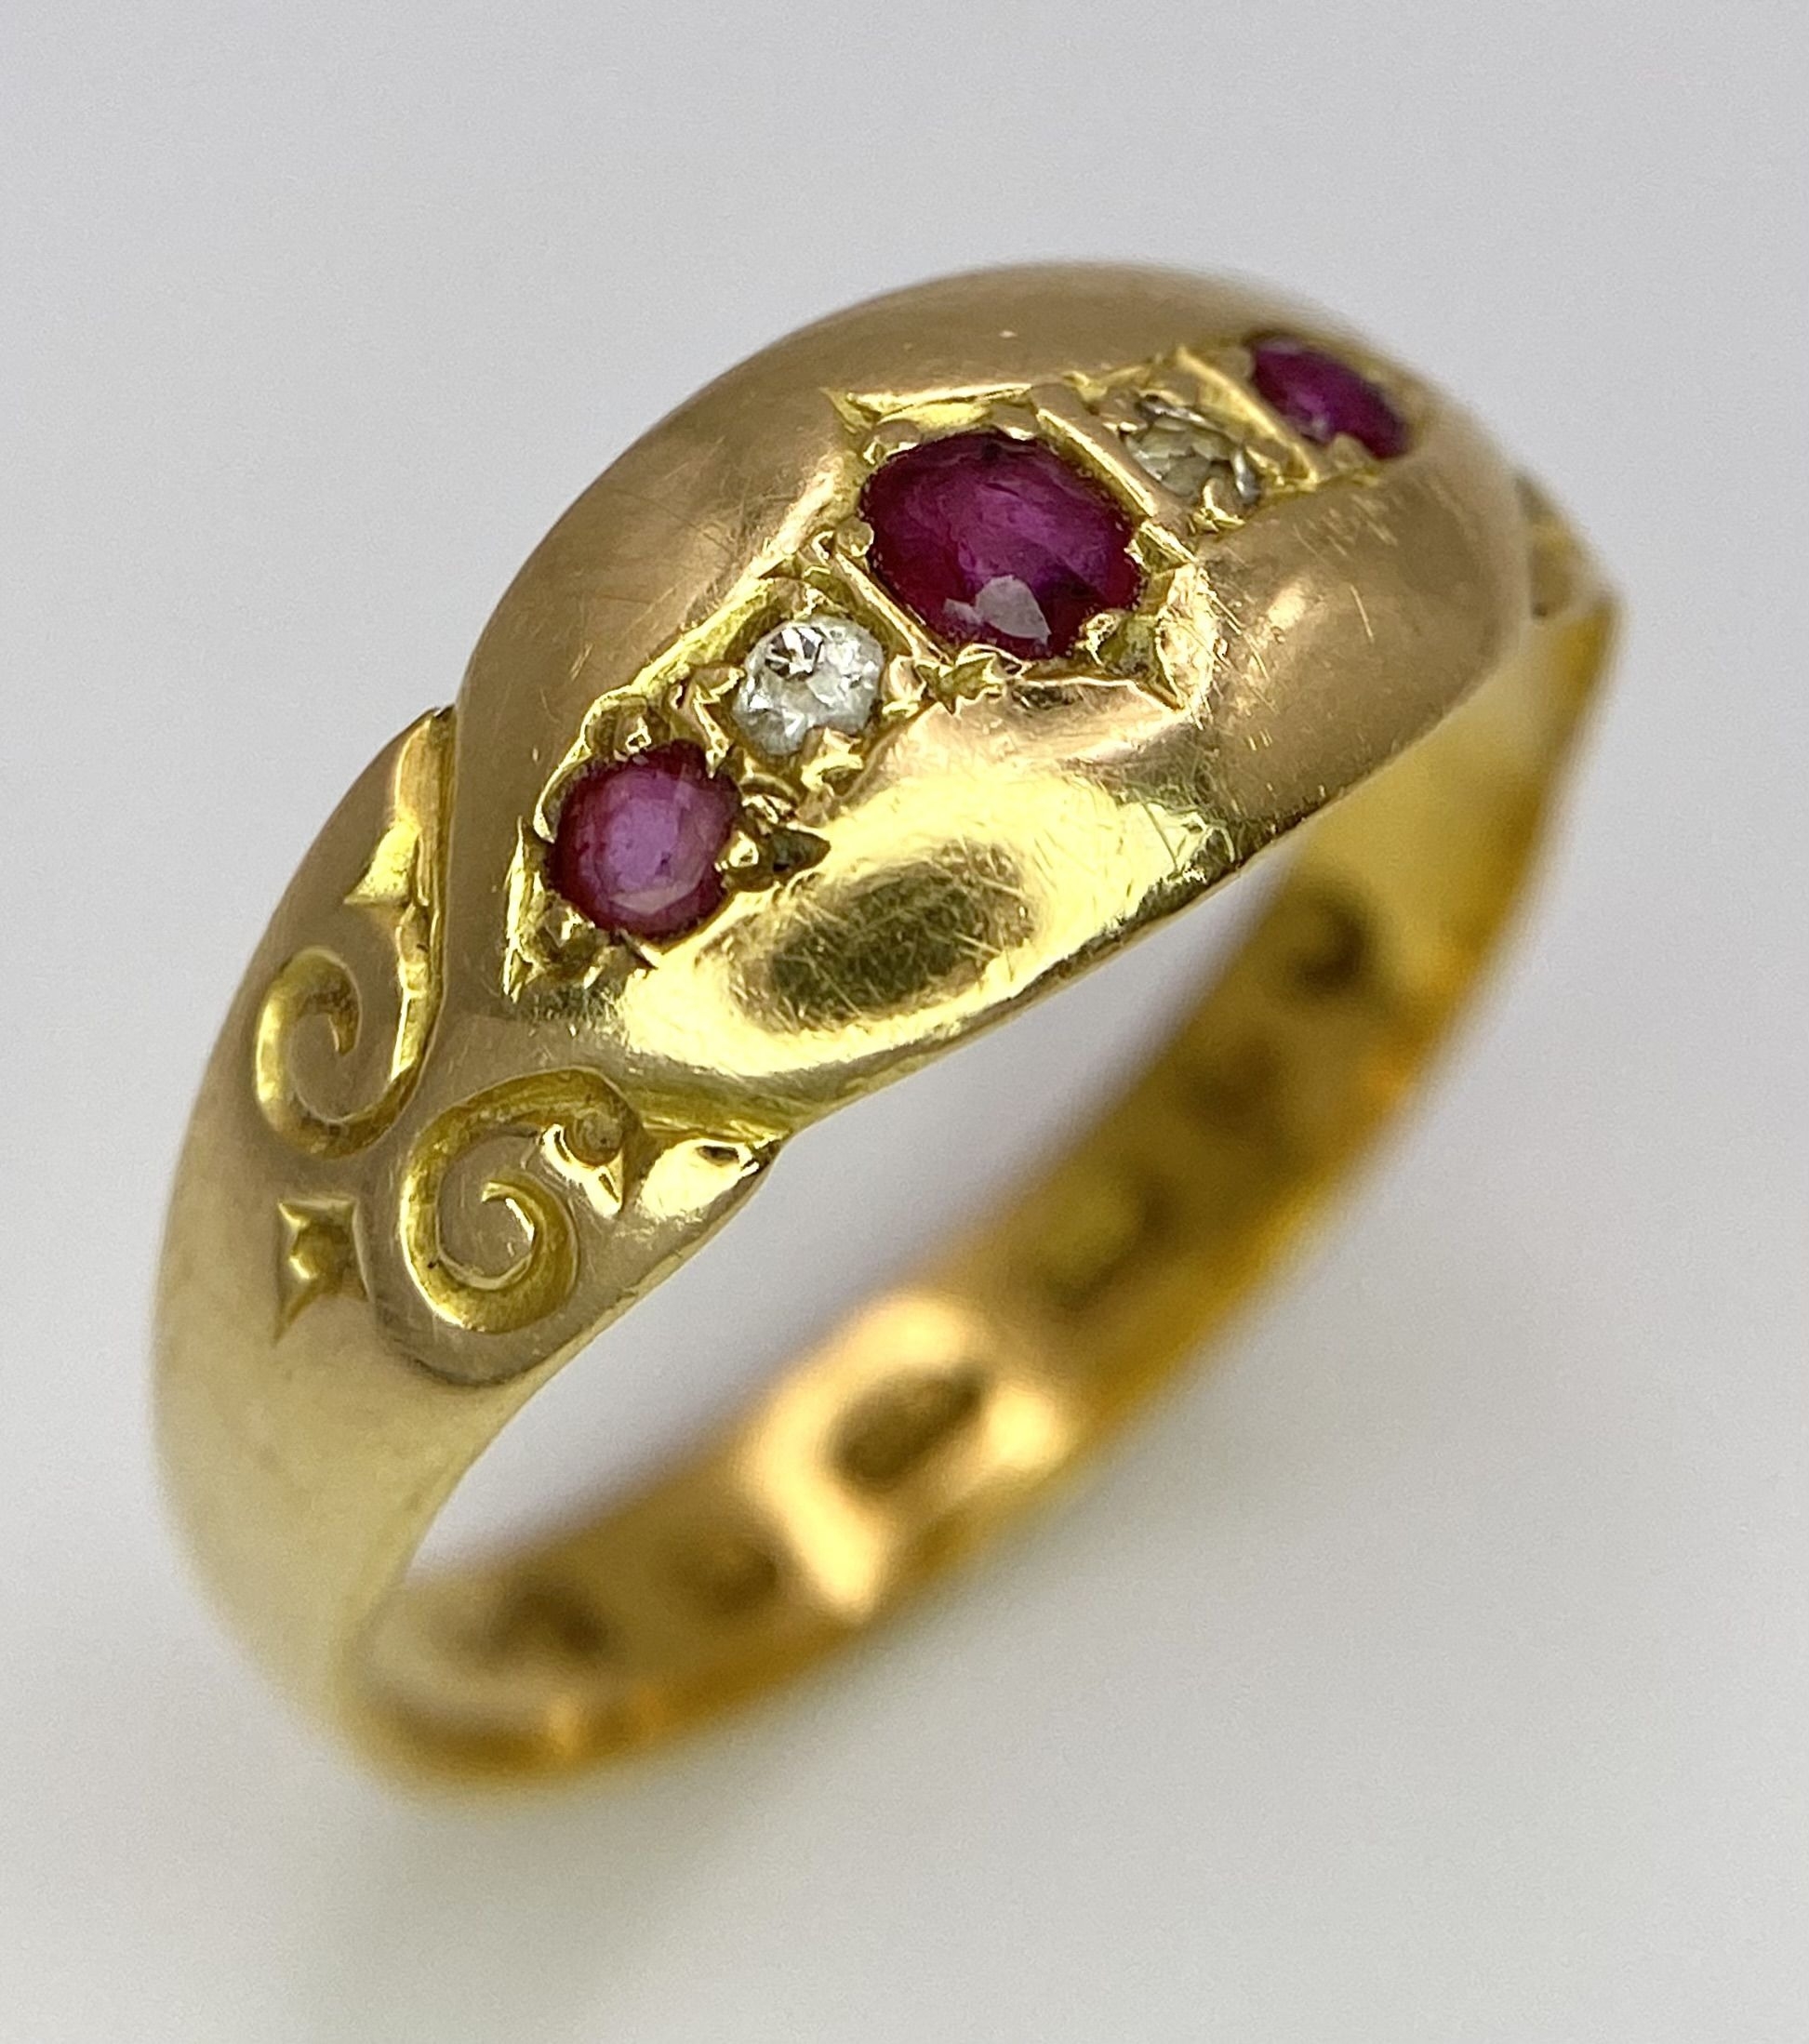 An Antique 22K Yellow Gold Ruby and Diamond Ring. Size M. 2.6g total weight. - Image 2 of 6